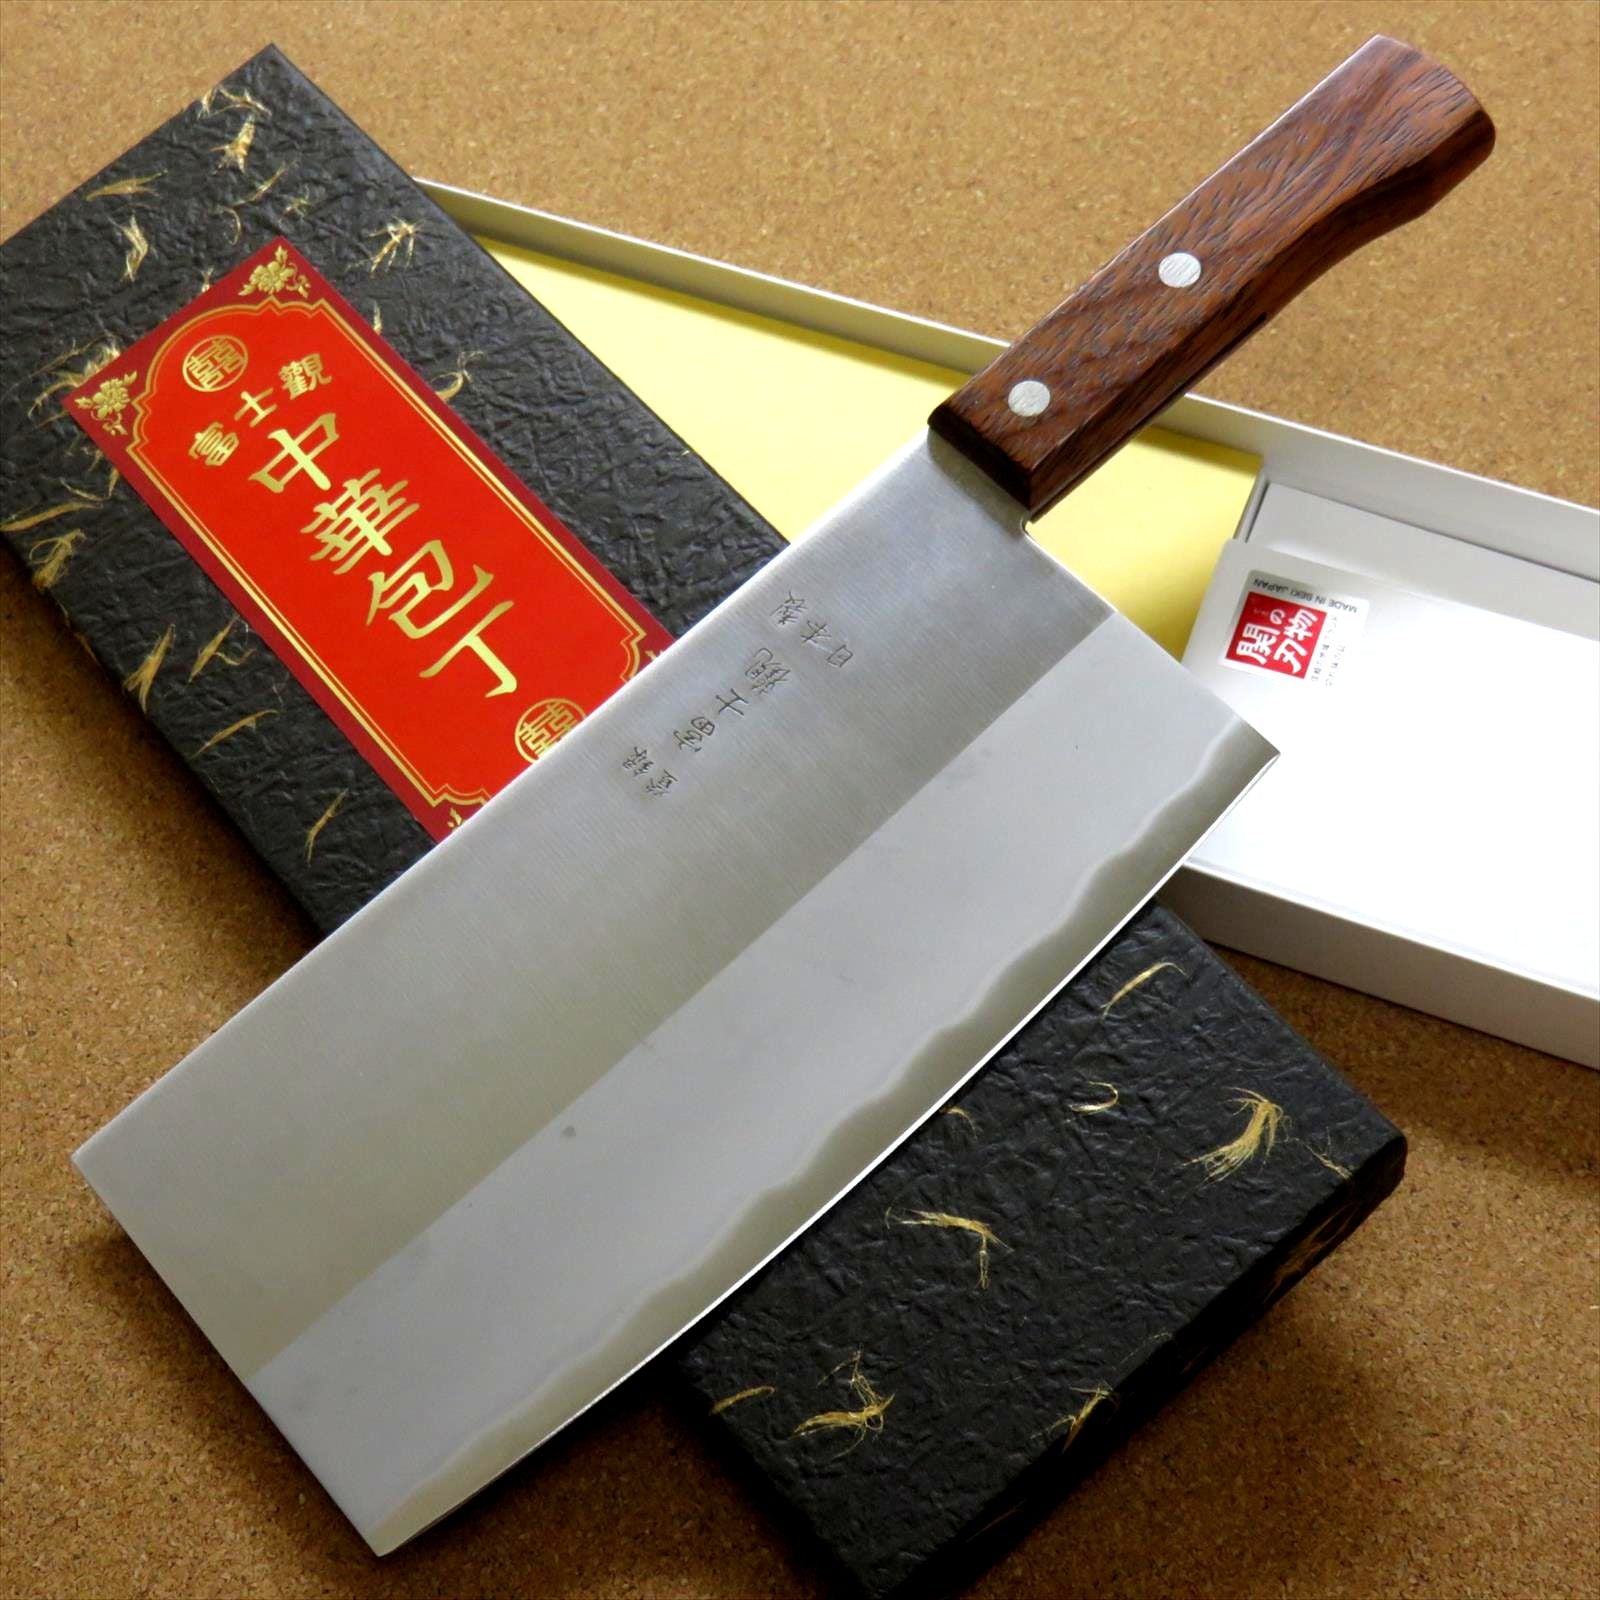 Crude - Chinese Vegetable Cleaver Knife, 7 inch, Carbon Steel, Super Thin &  Light